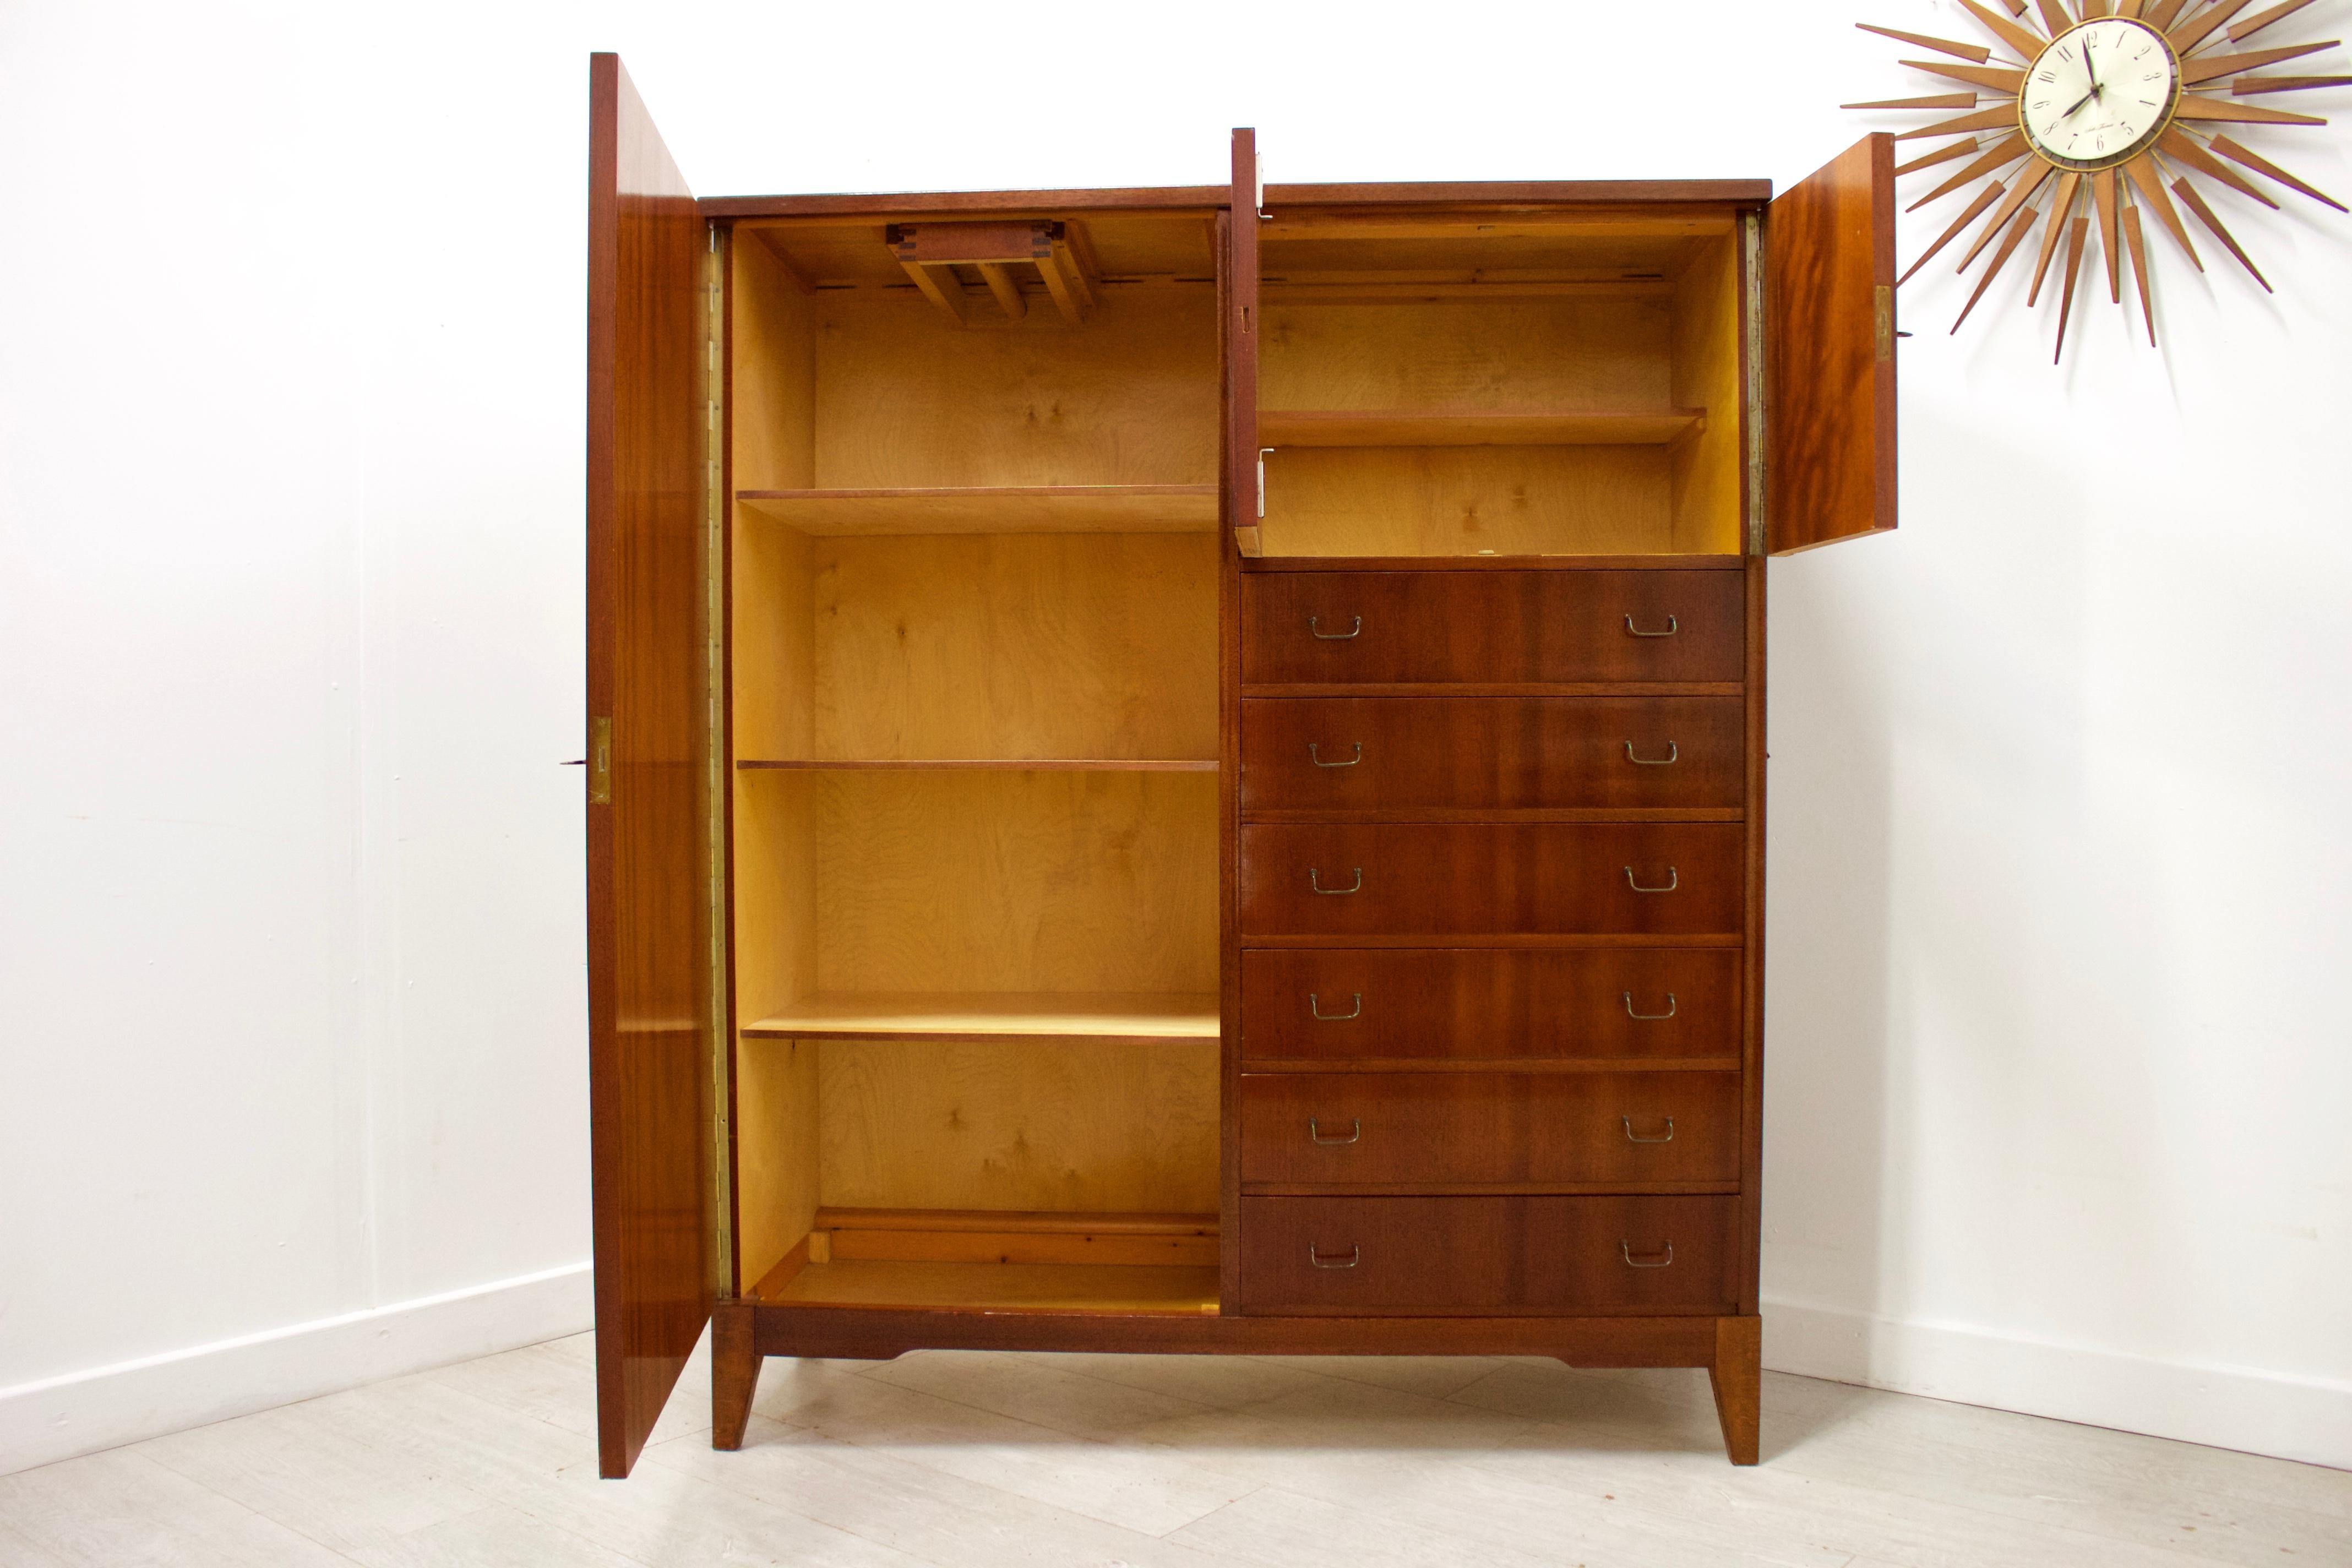 Midcentury Danish Linen Cabinet or Tallboy In Good Condition For Sale In South Shields, Tyne and Wear